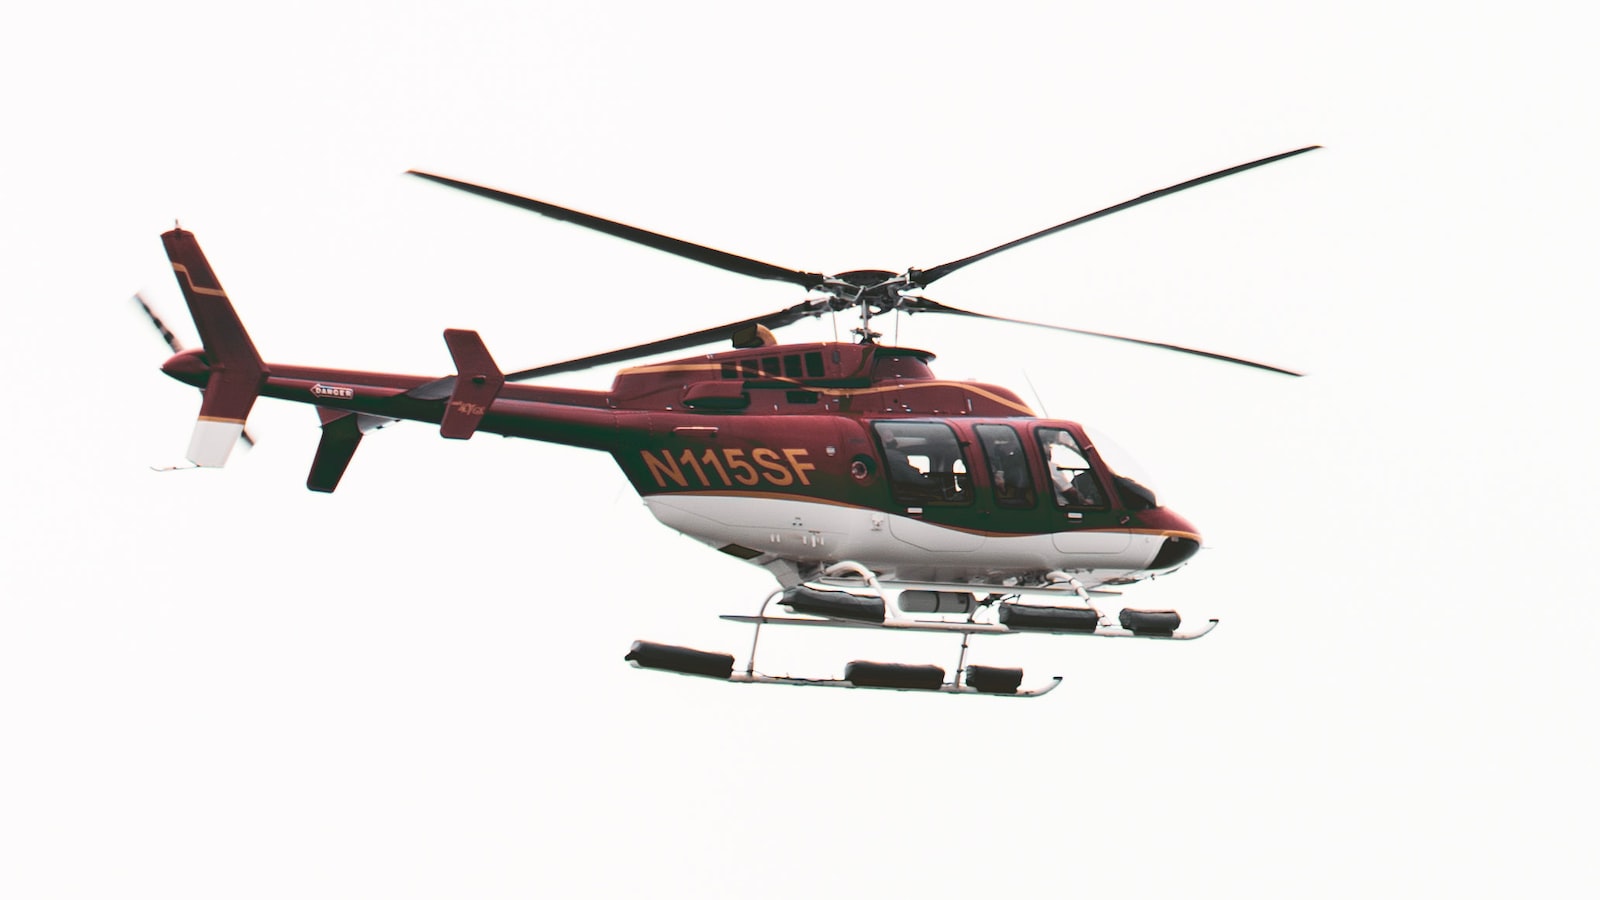 5. Dominating the Skies: The Elite League of High-Performance Private Helicopter Brands